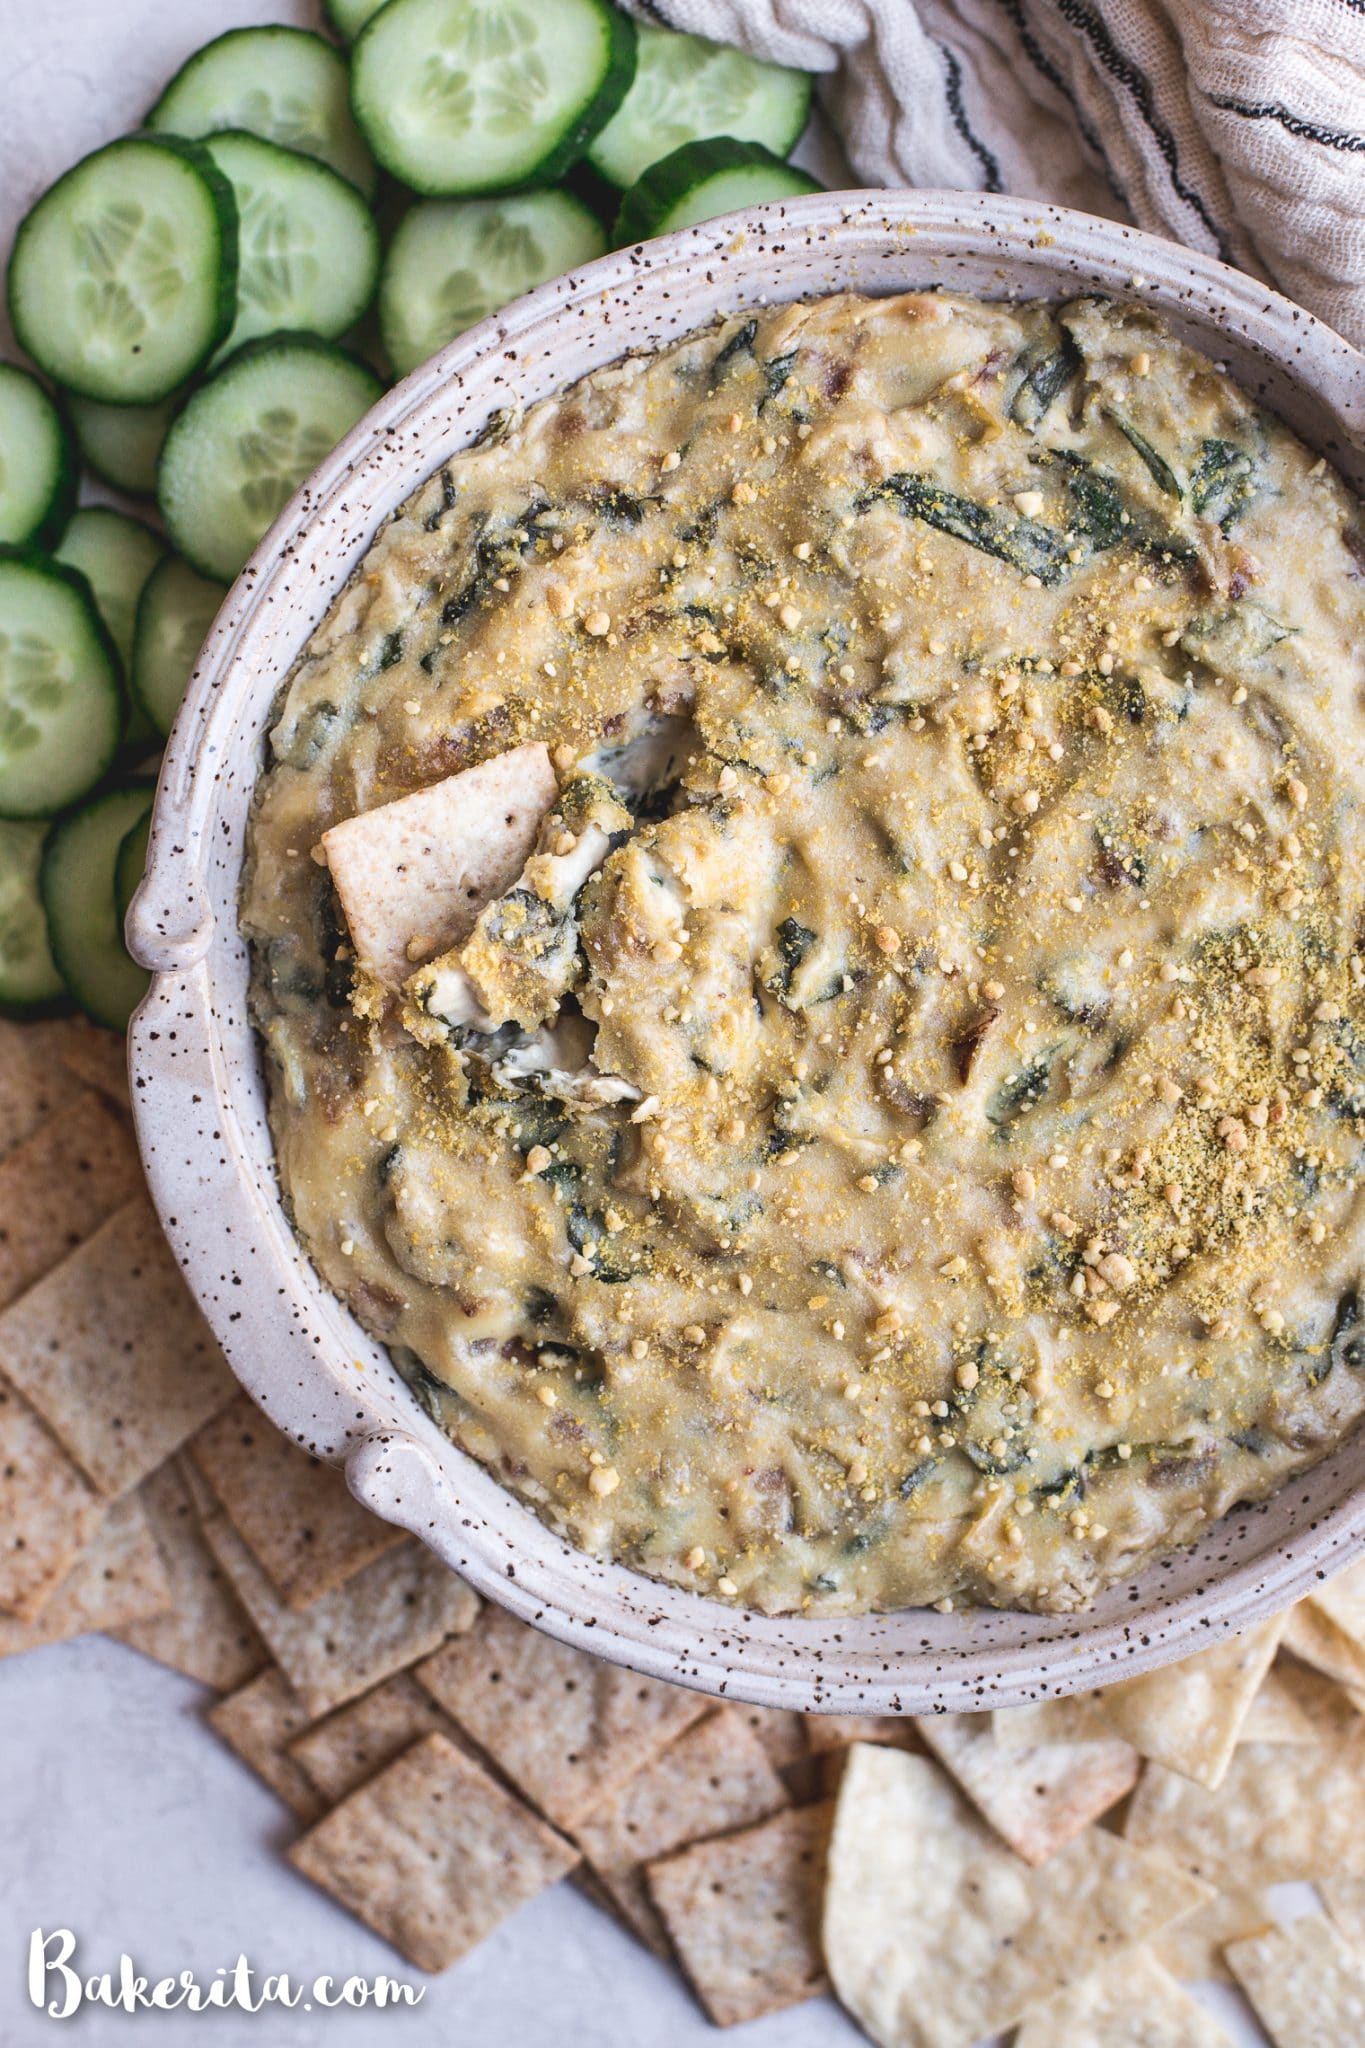 Vegan Spinach Artichoke Dip: tastes as good as the original, but it's dairy-free, soy-free, gluten-free, and Whole30! No processed ingredients here - just whole, plant-based foods. It's perfect as an appetizer or for game day.